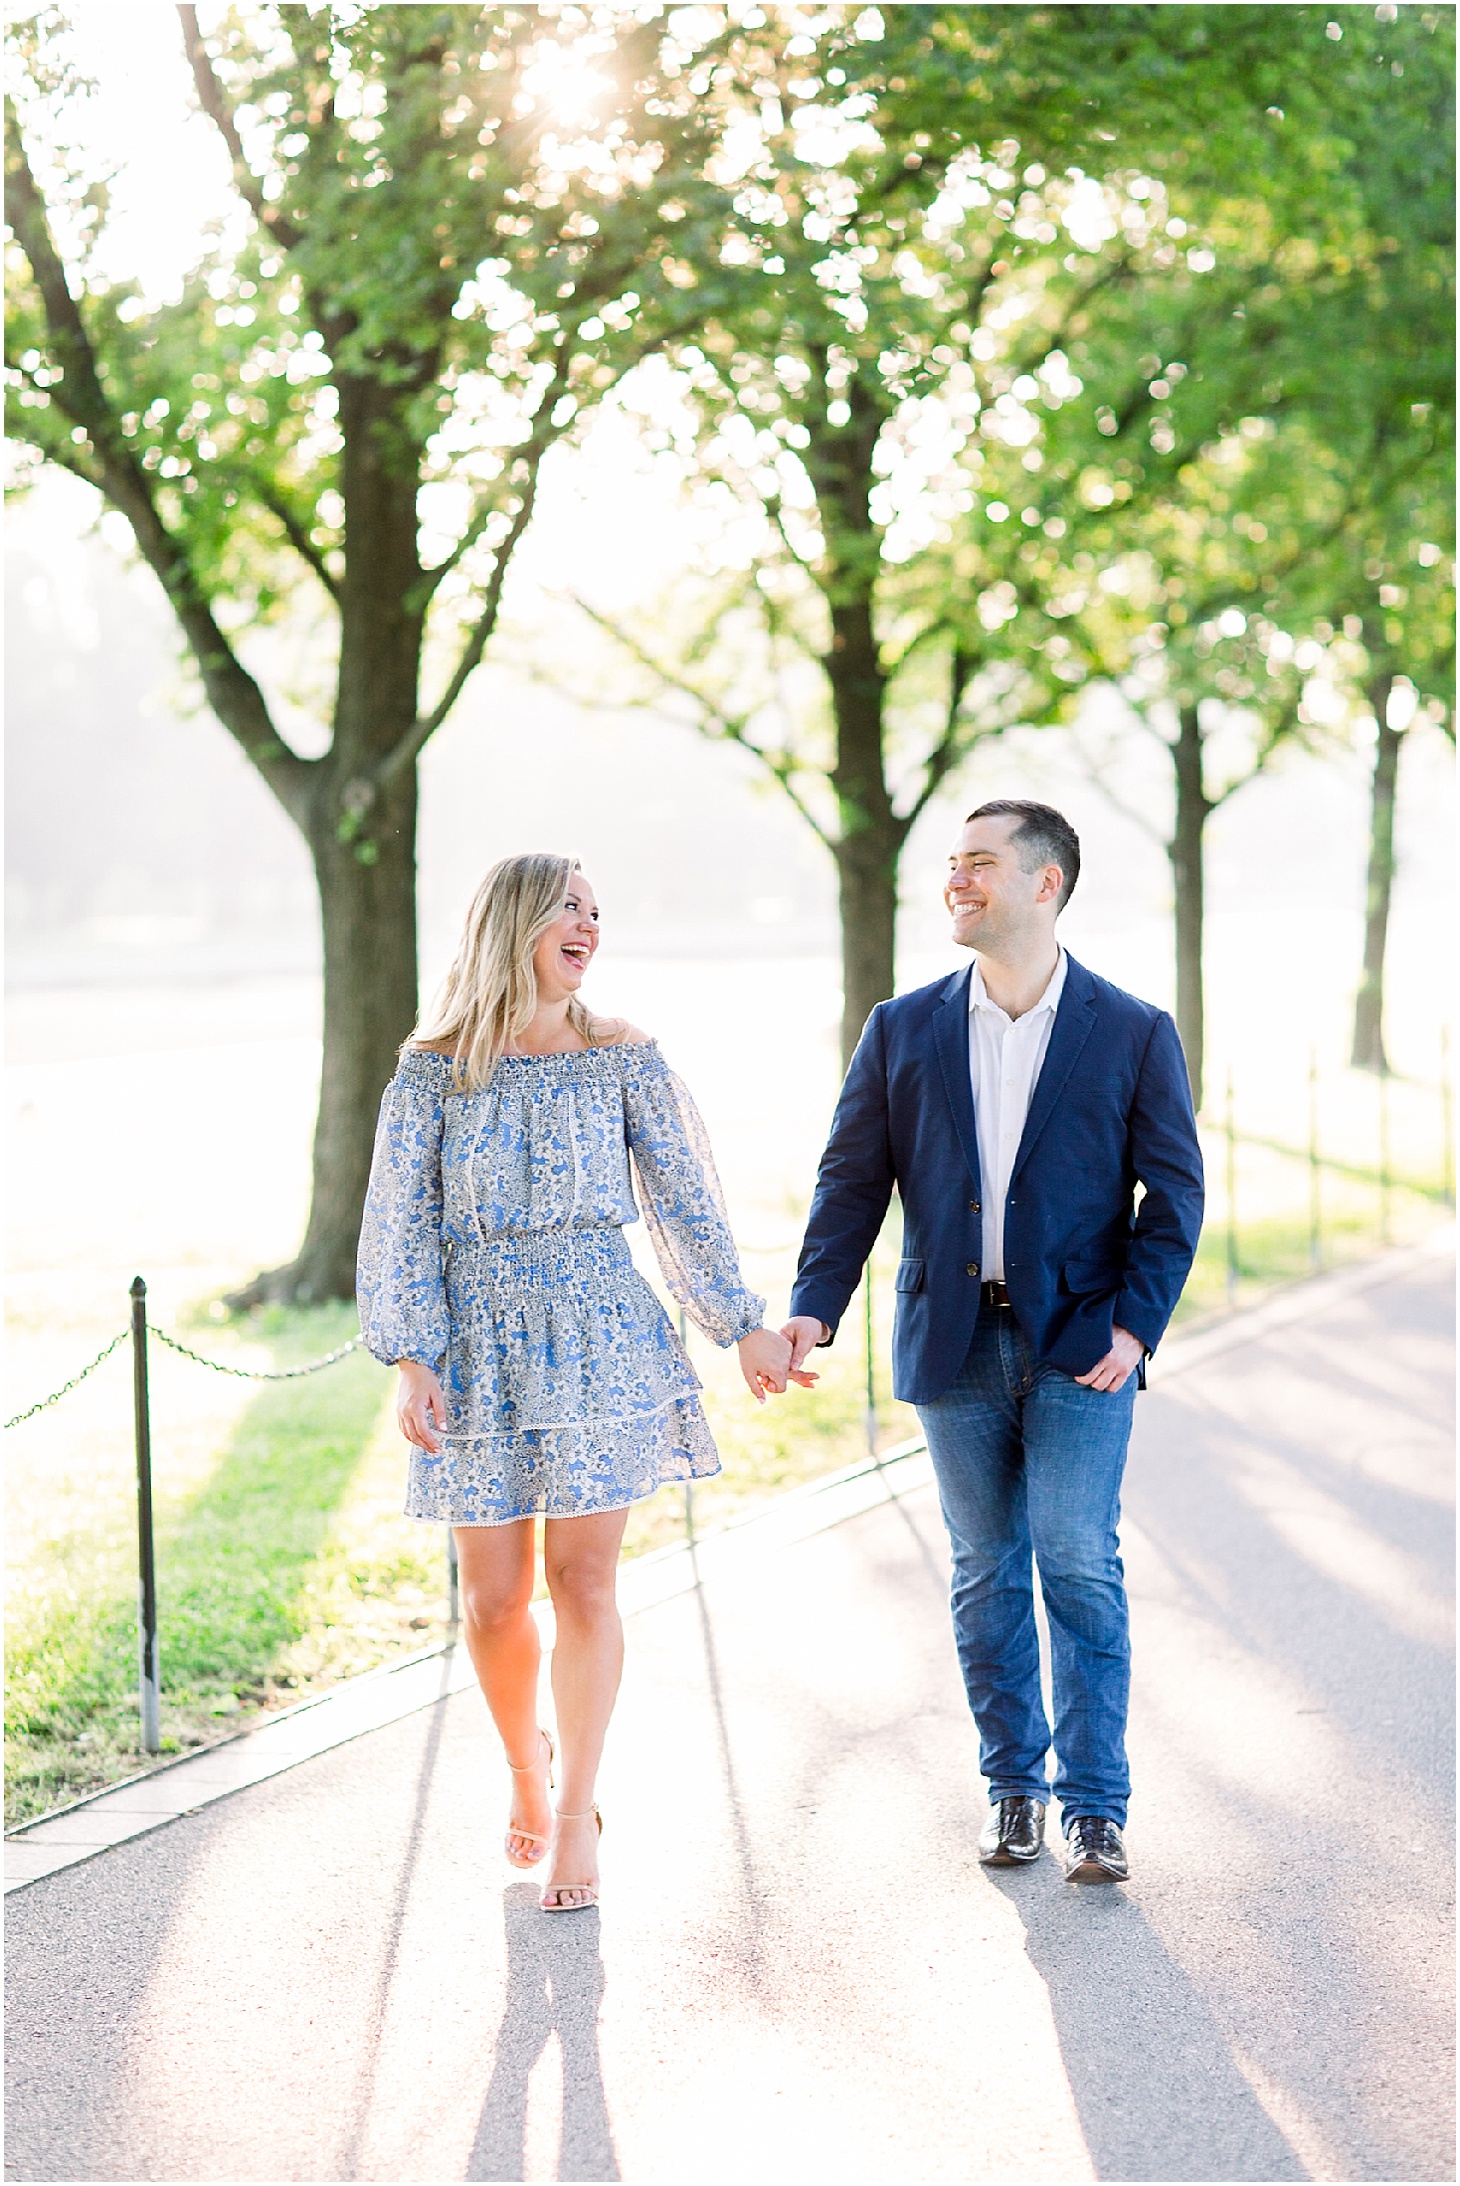 Spring Engagement Portraits on the National Mall | Sunrise Engagement Session on Capitol Hill | Sarah Bradshaw Photography | DC Wedding Photographer